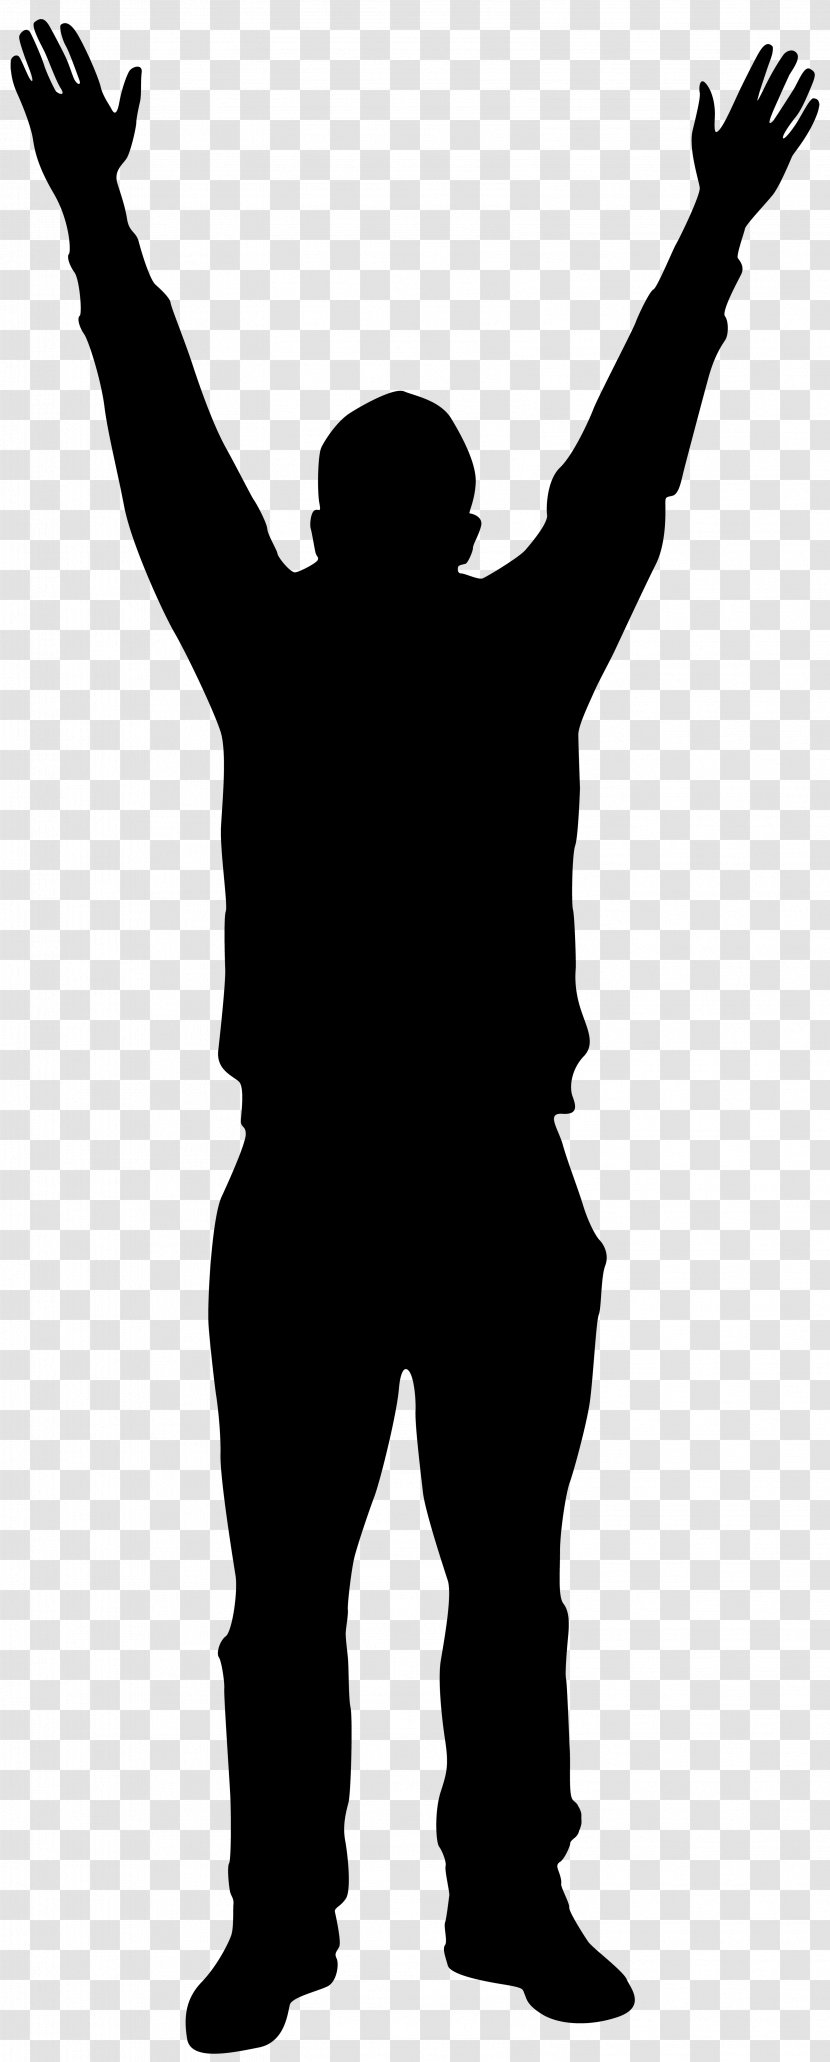 Standing Silhouette Gesture Transparent PNG